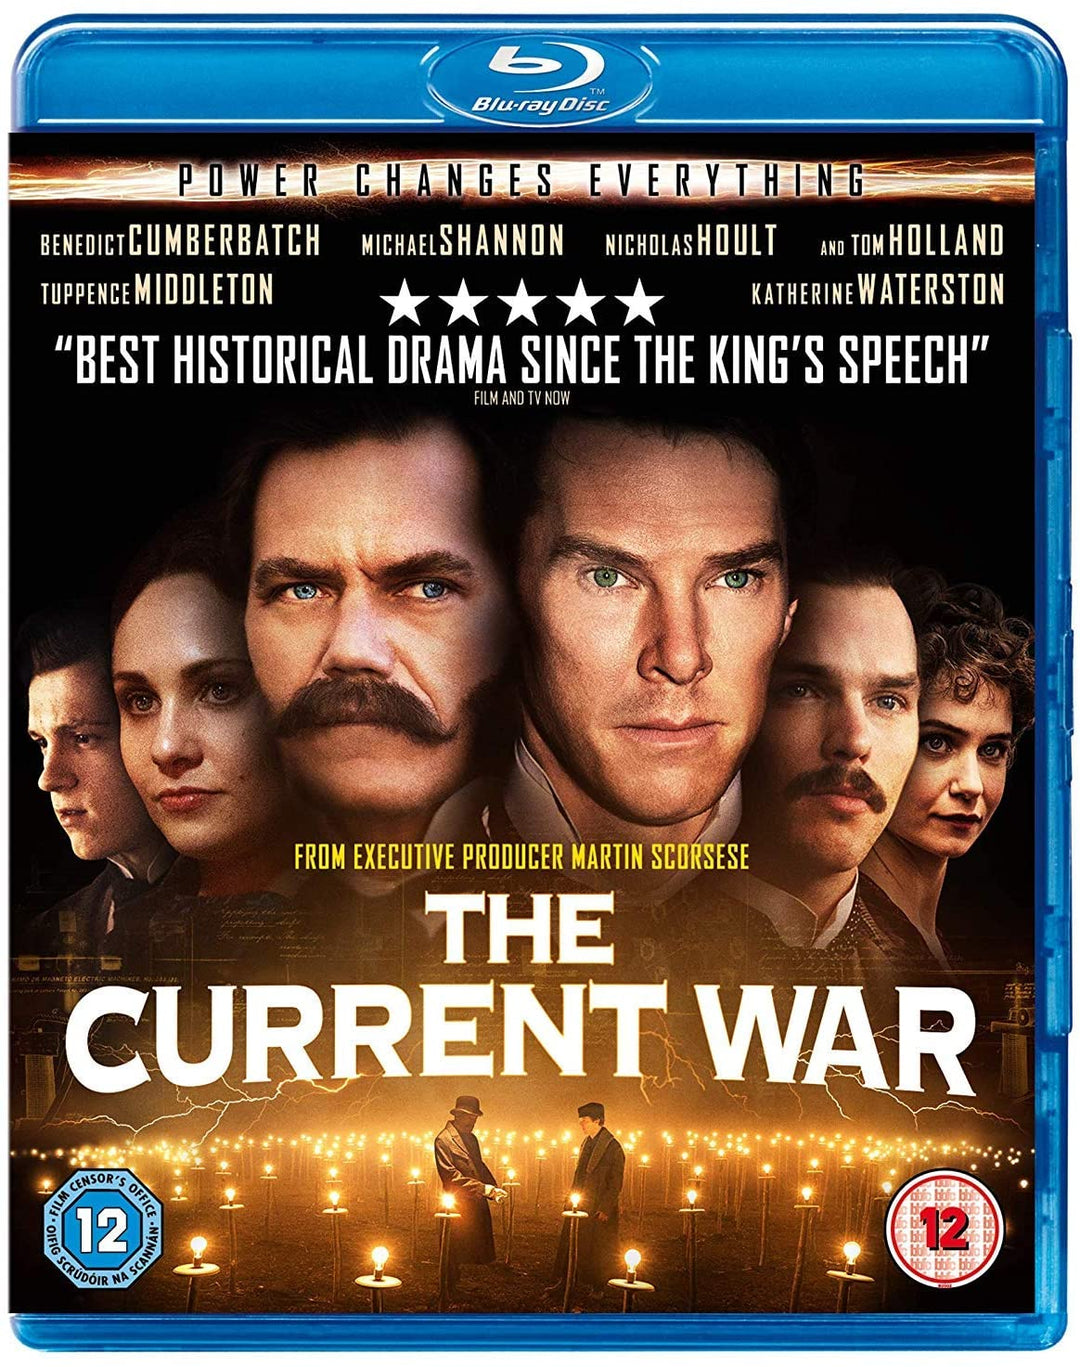 The Current War [2019] - Drama/History [DVD]